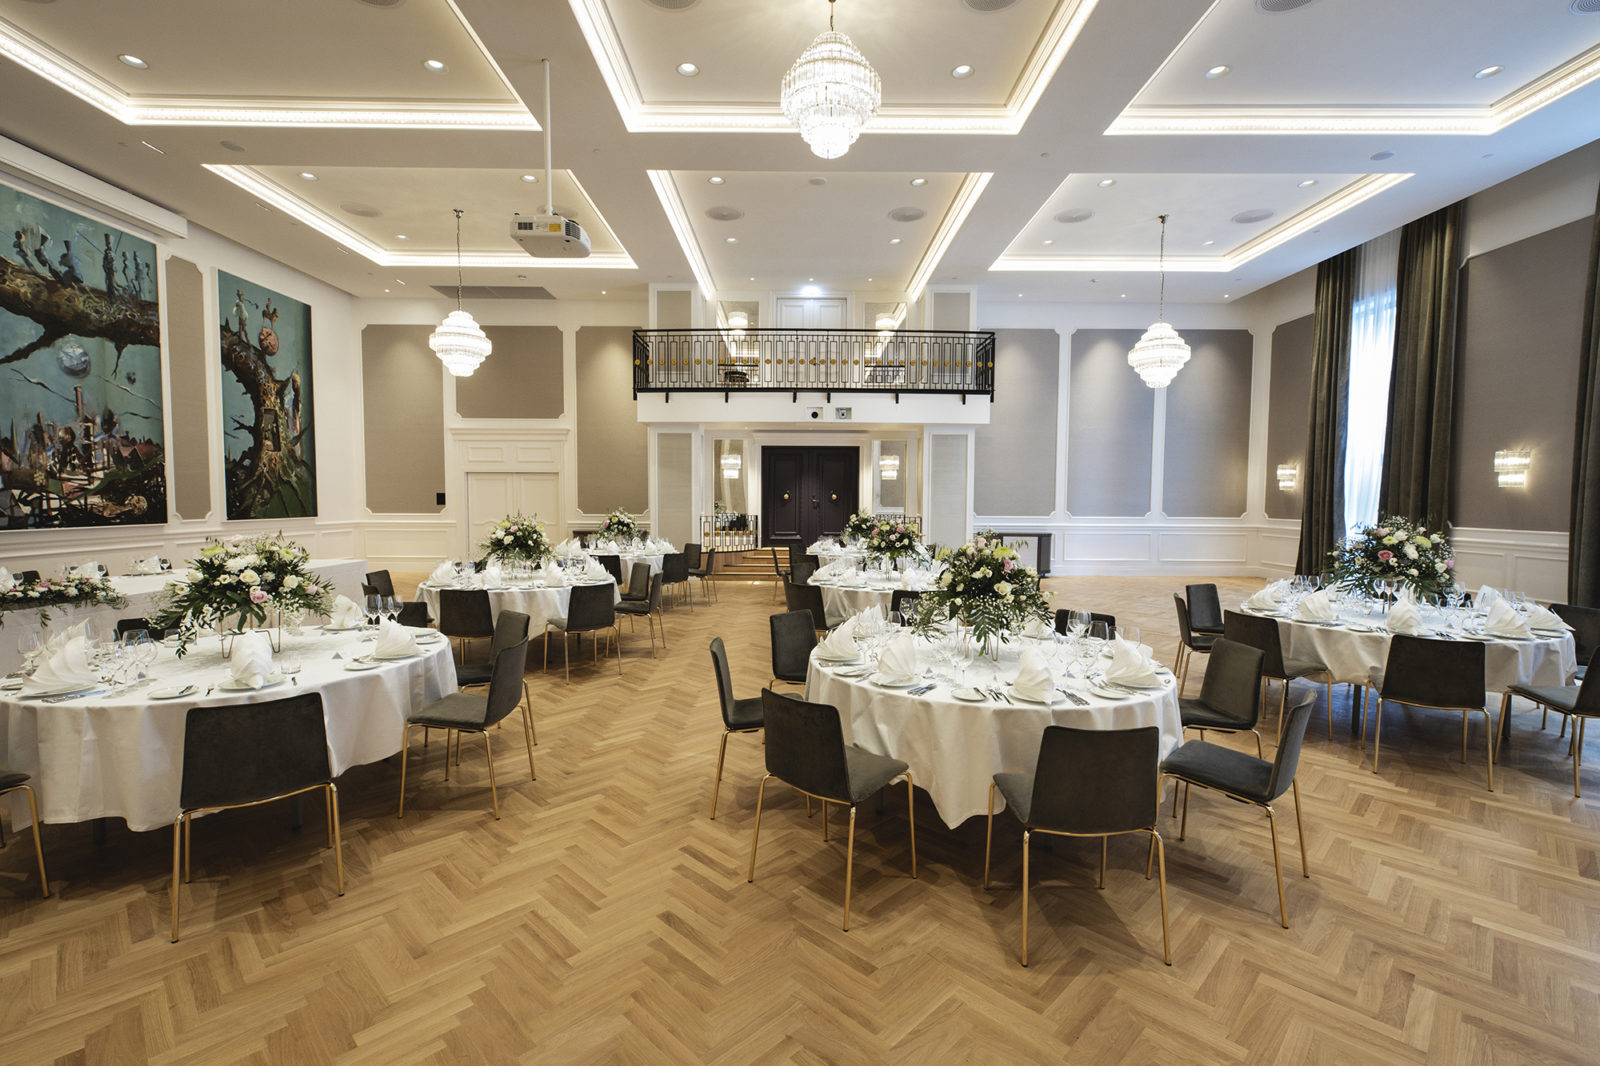 Britannia Hall with round table seating, fine details and artwork on the walls